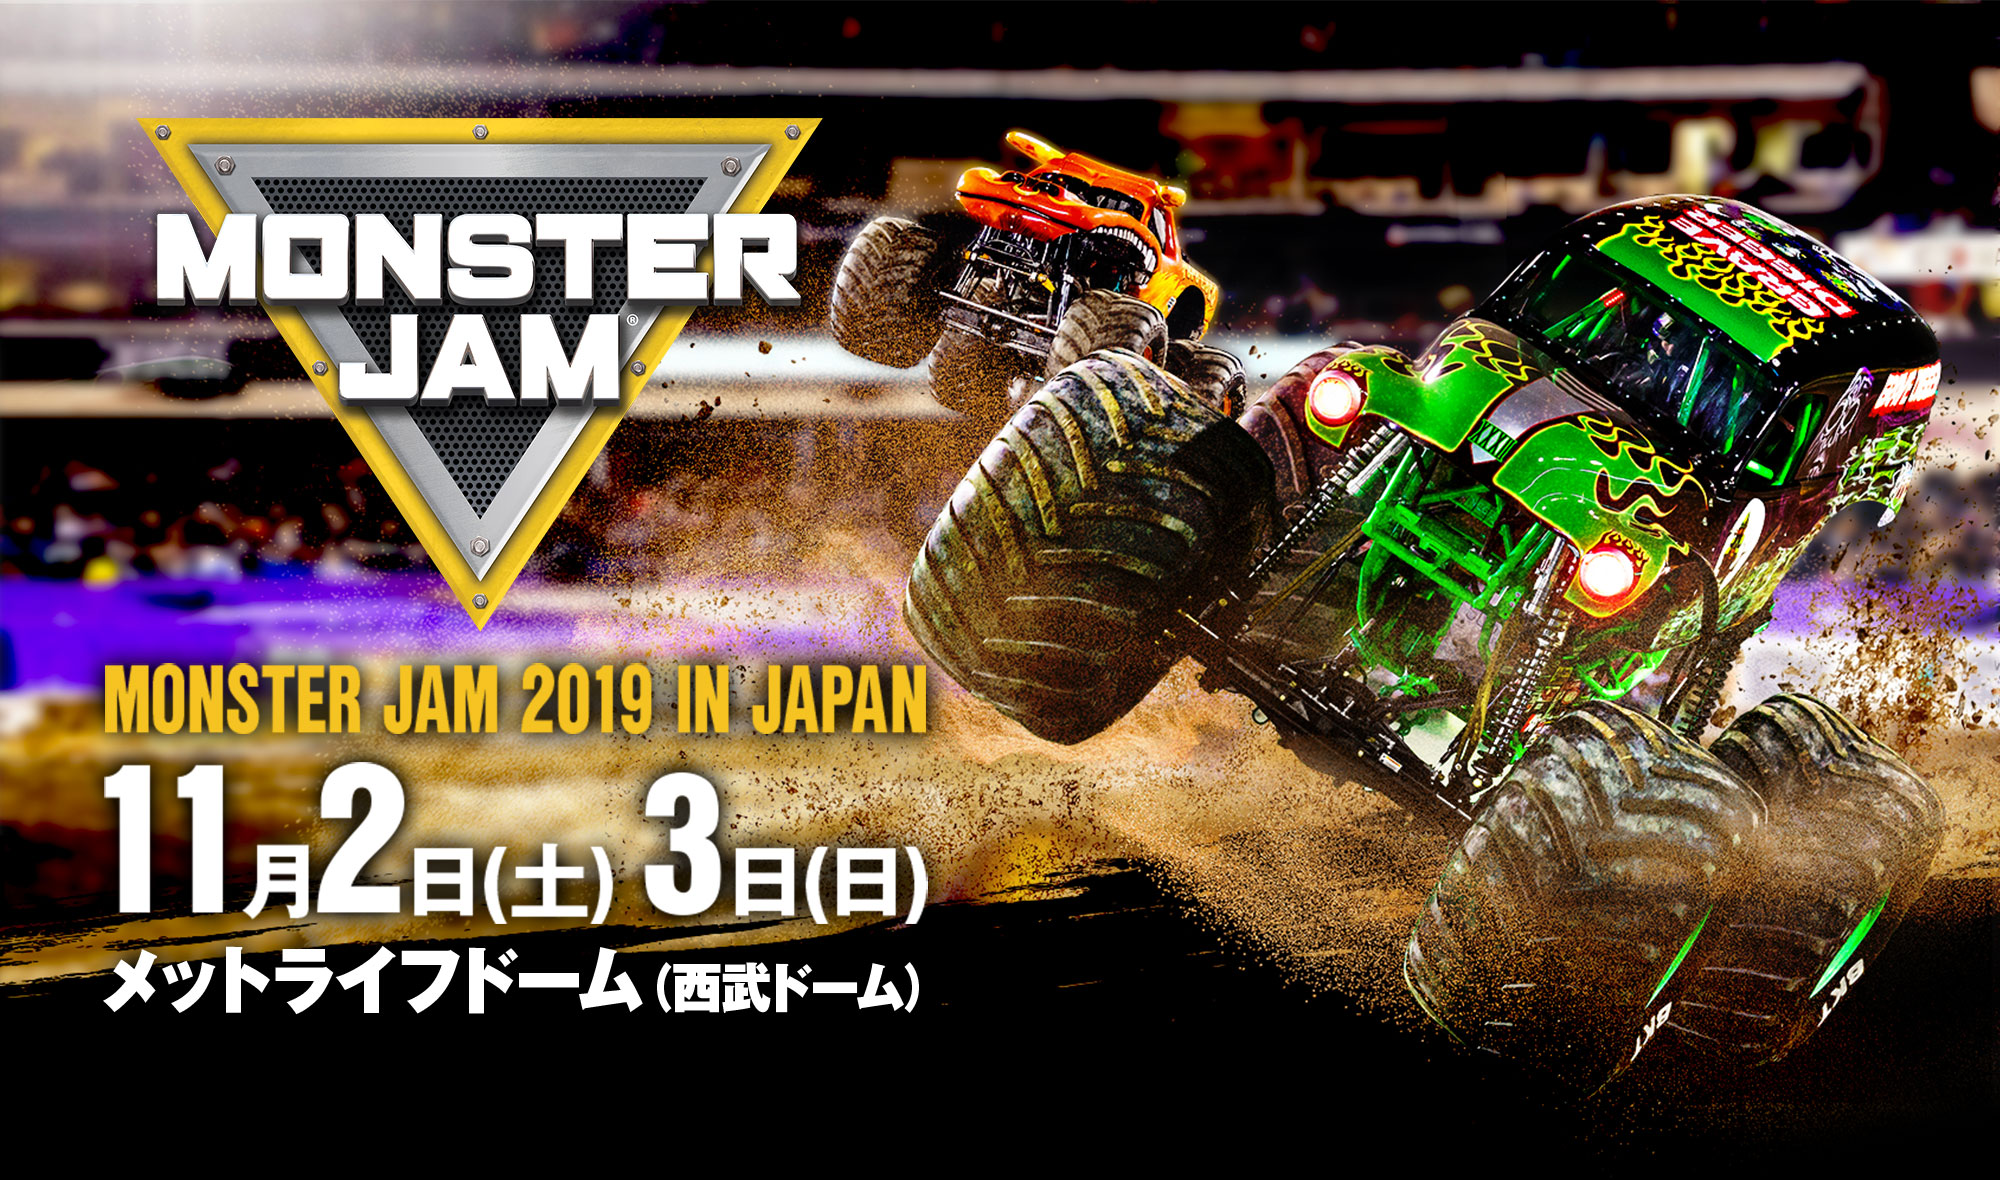 ABOUT｜MONSTER JAM 2019 IN JAPAN｜チケットぴあ